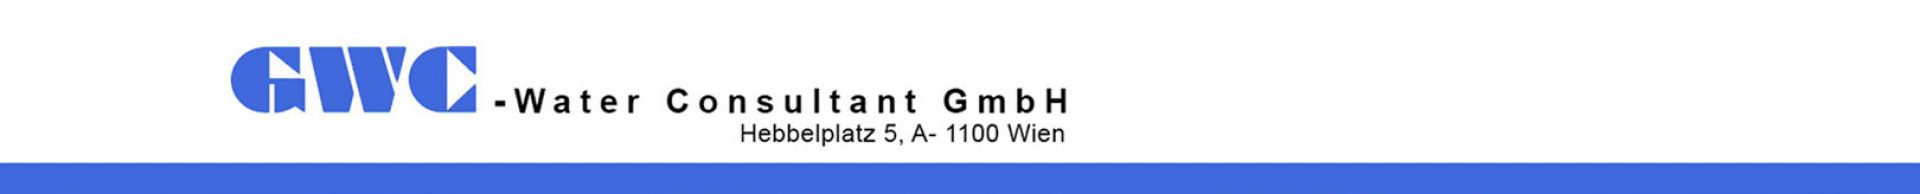 GWC Water Consultant GmbH